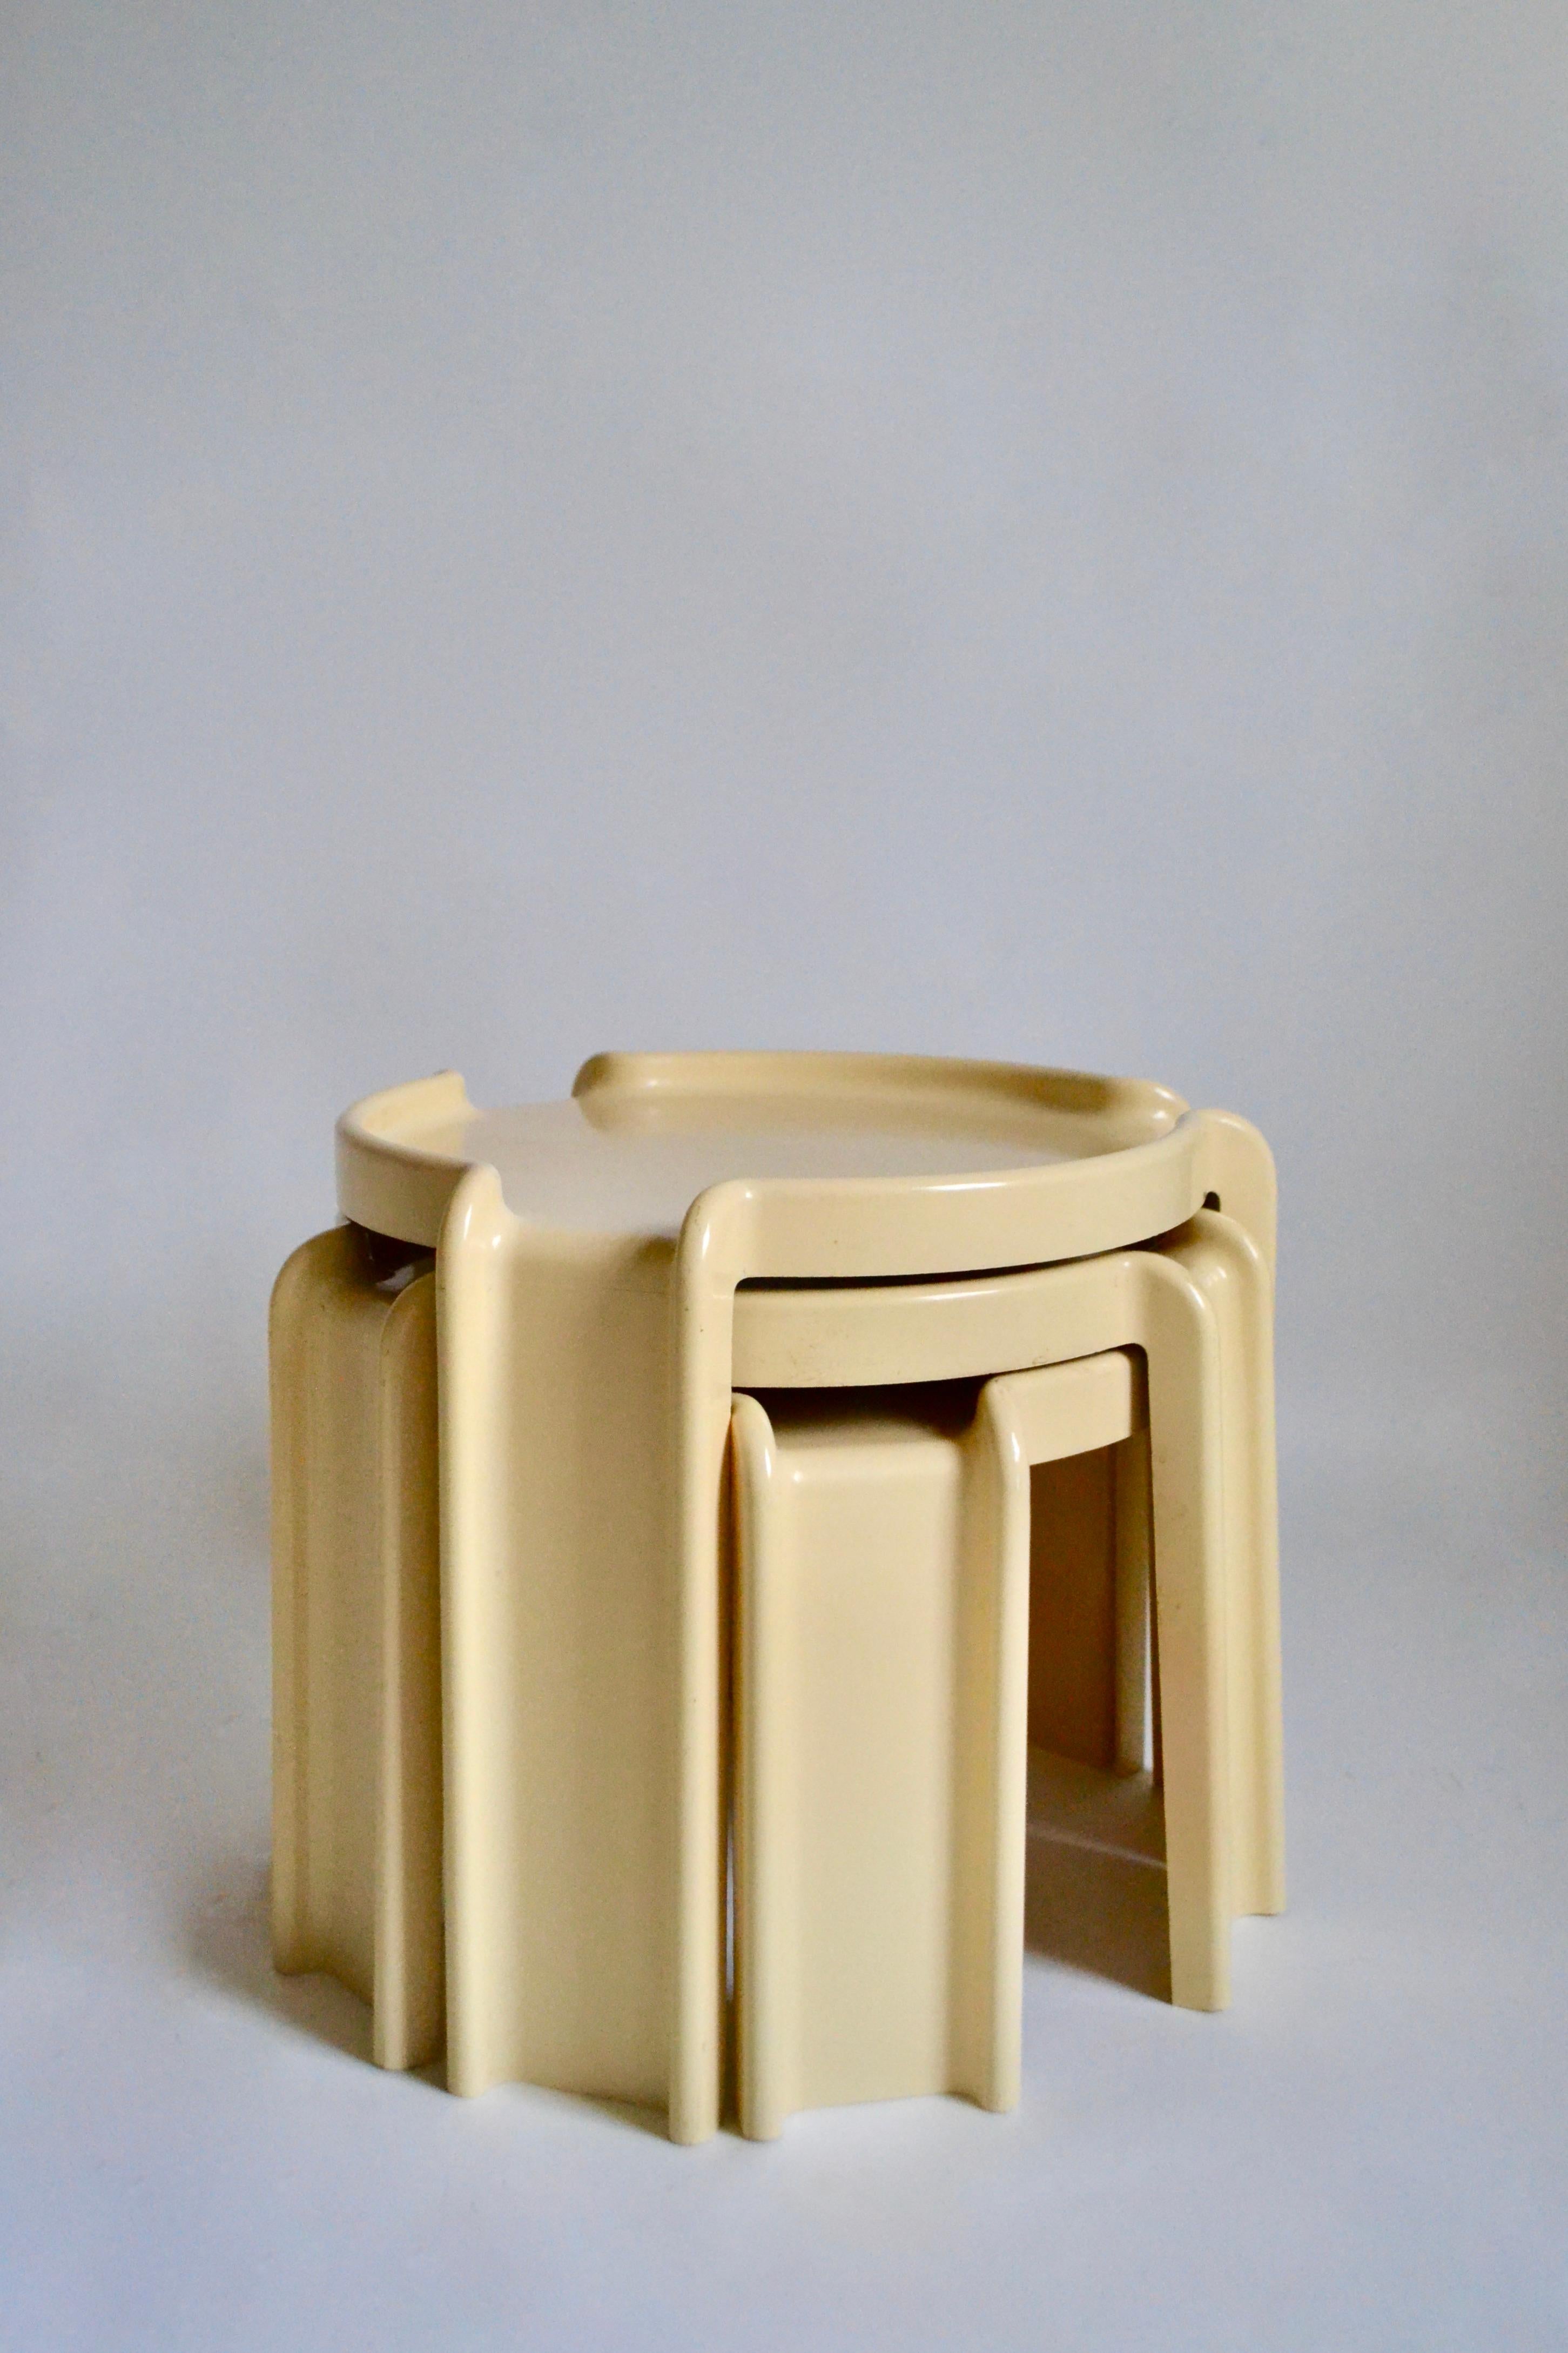 Trio of plastic cream nesting tables designed by Giotto Stoppino for Kartell in the 1970s. Designed in Italy and manufactured in Australia. Makers stamp at base of each table. Scuffs and wear commensurate with age, not distracting from the overall